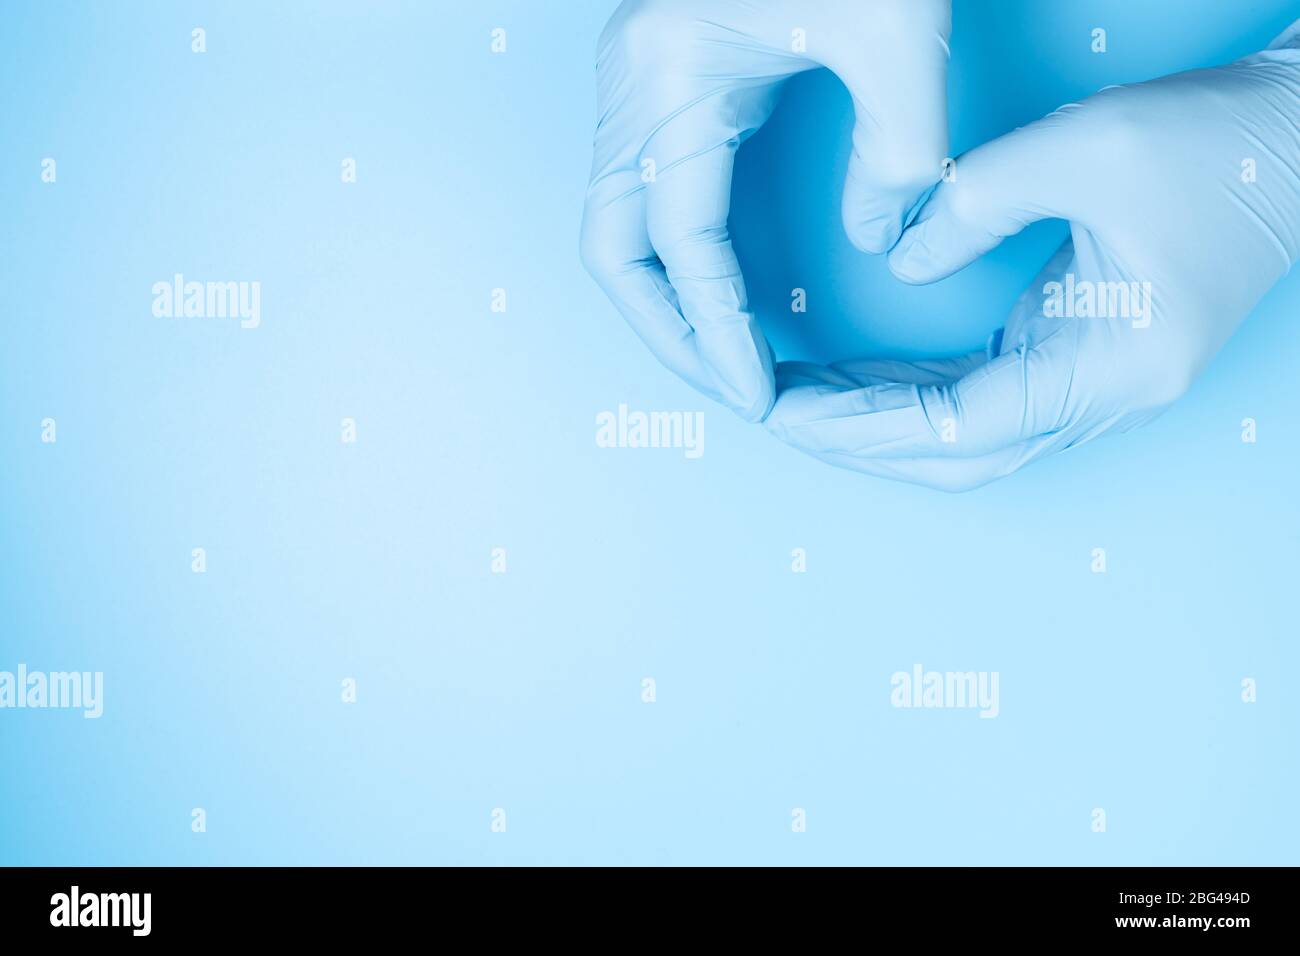 Doctor hands with gloves making heart shape Stock Photo